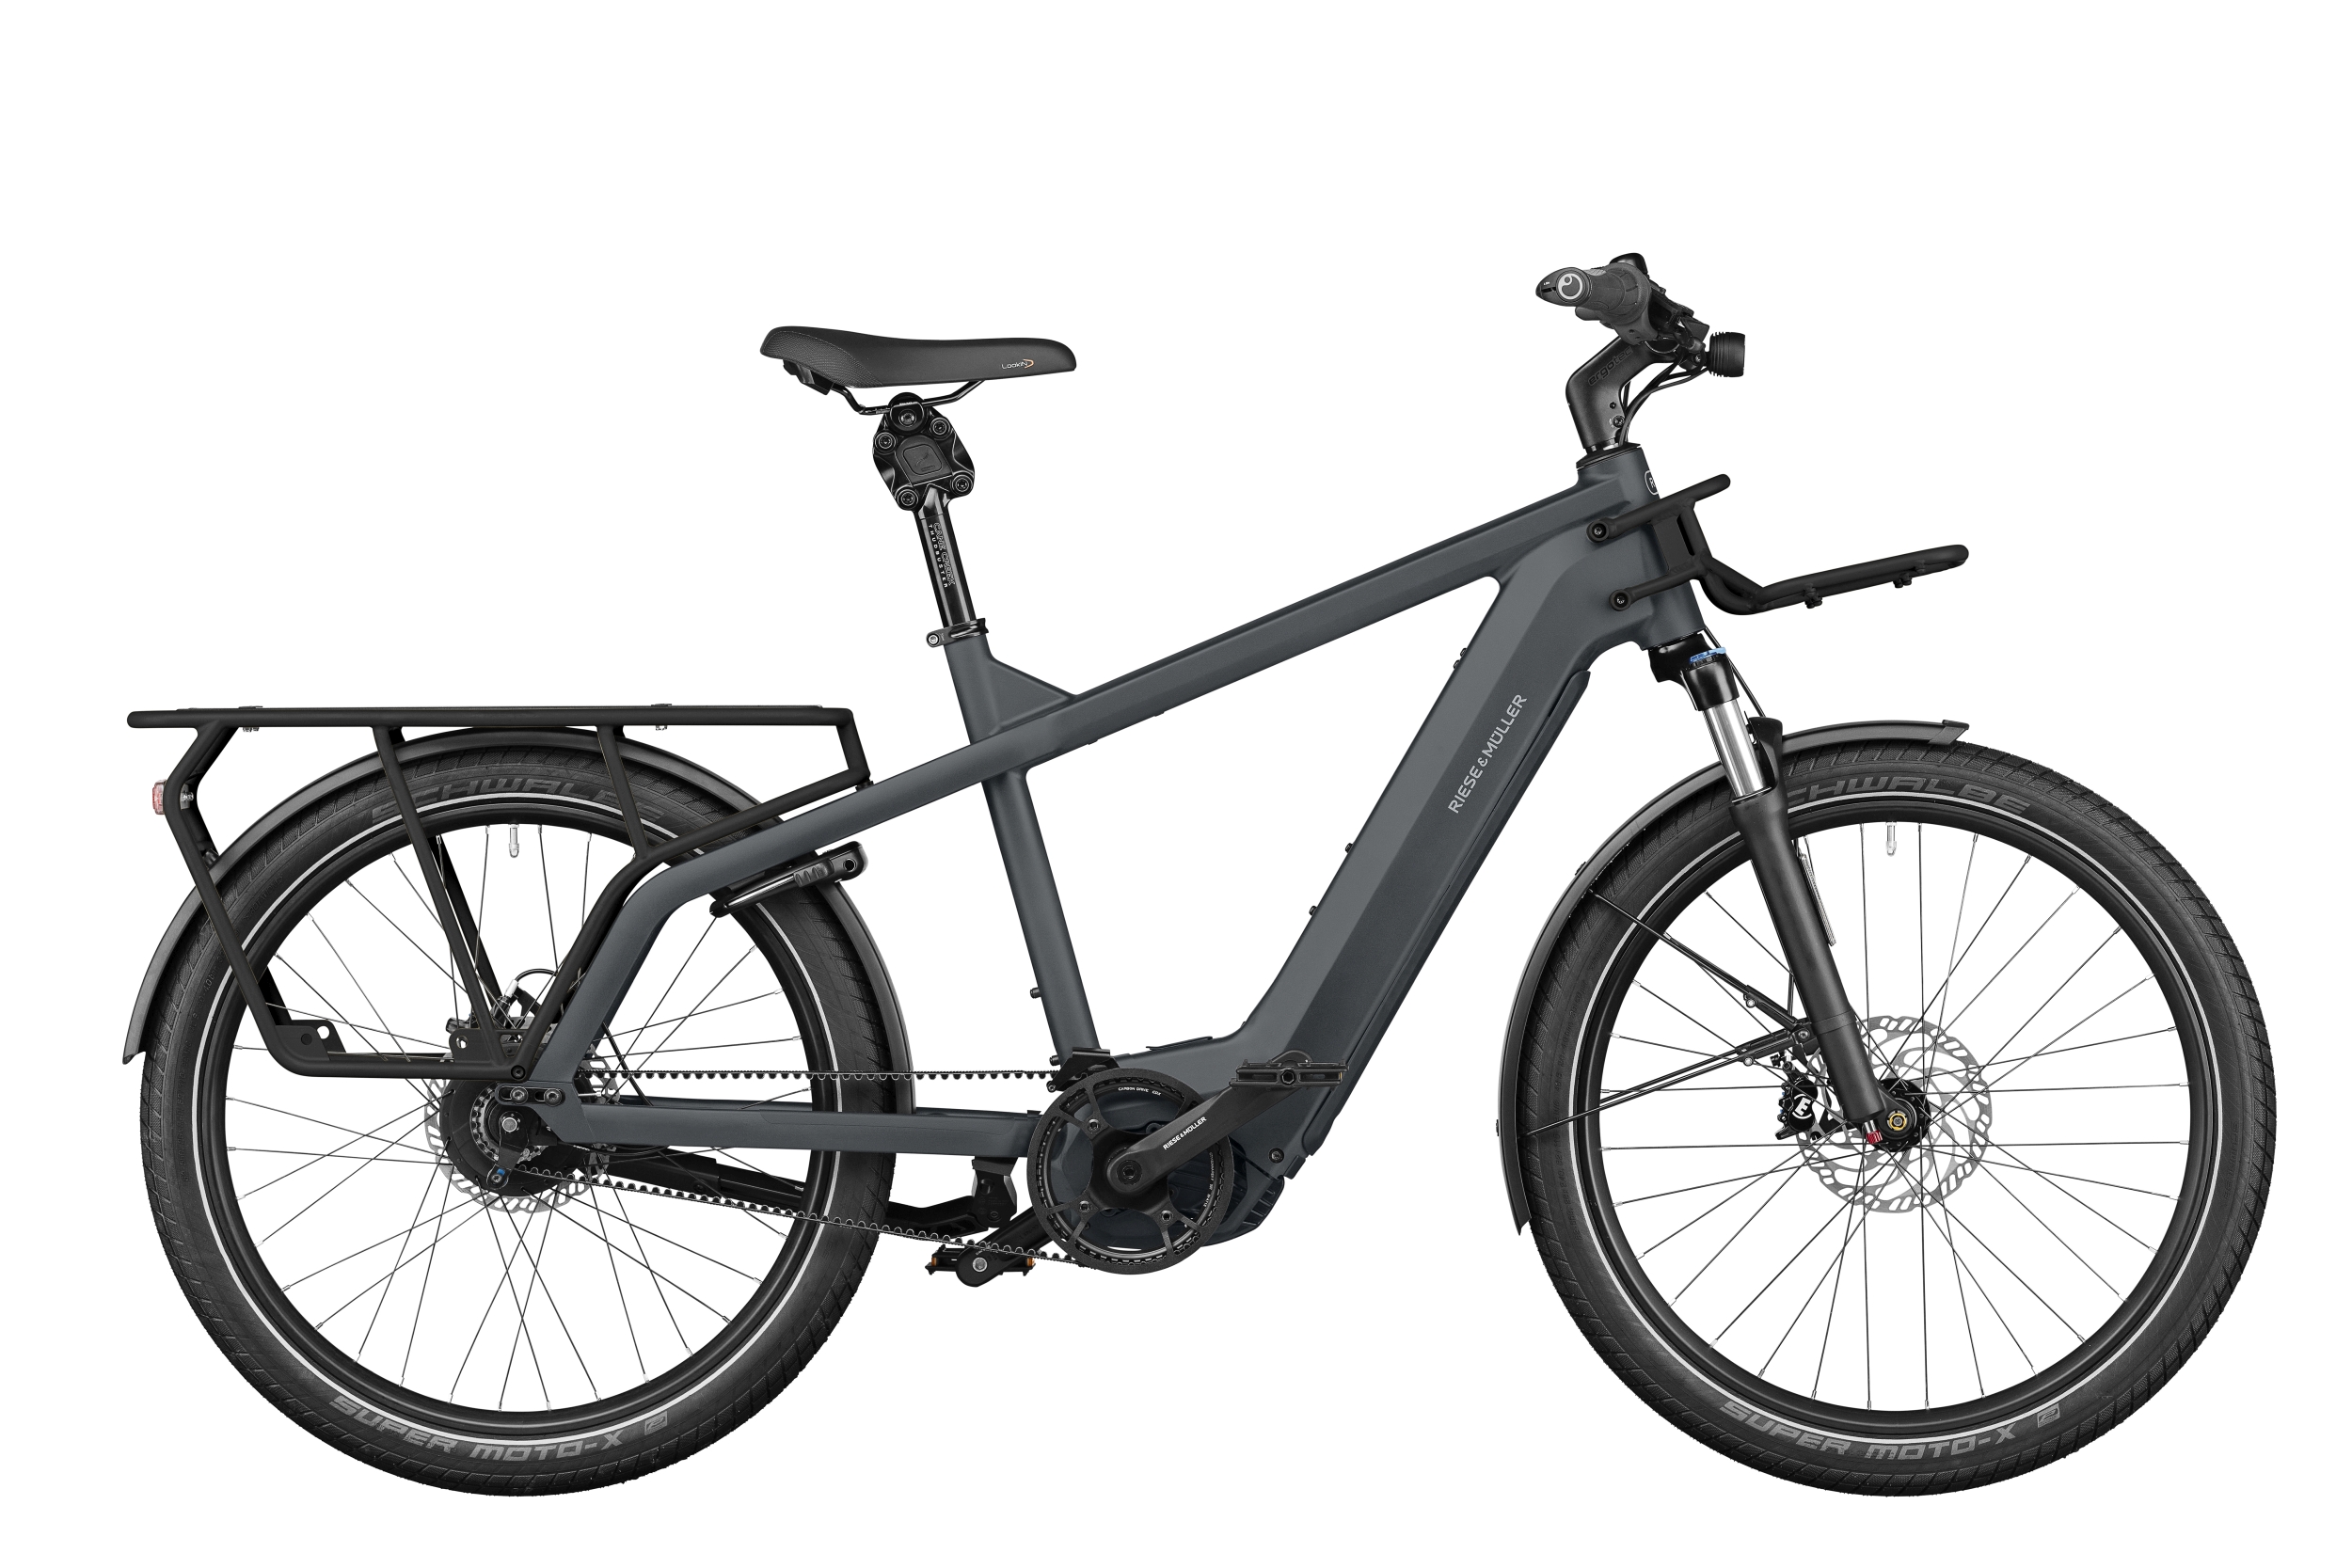 Riese & Müller Multicharger GT Vario,51cm,625Wh,